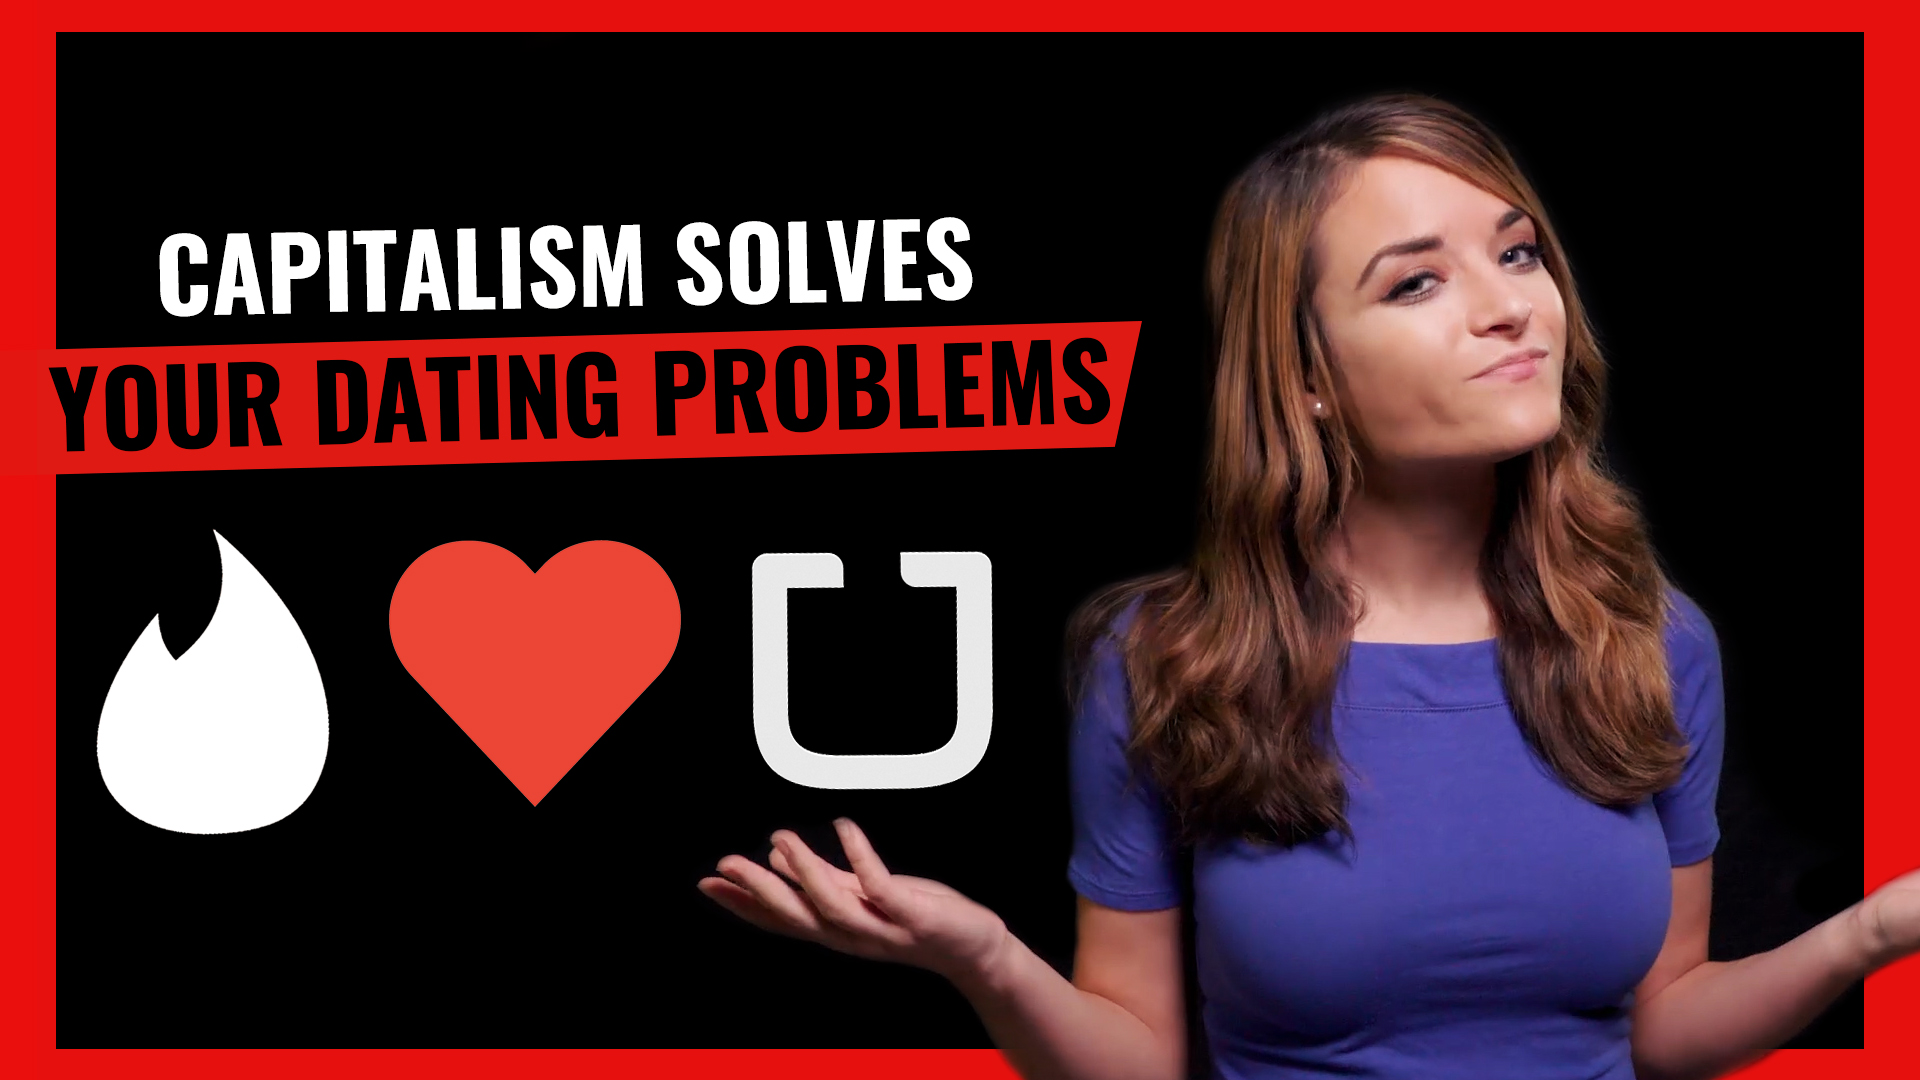 dating problems, dating apps, uber, capitalism